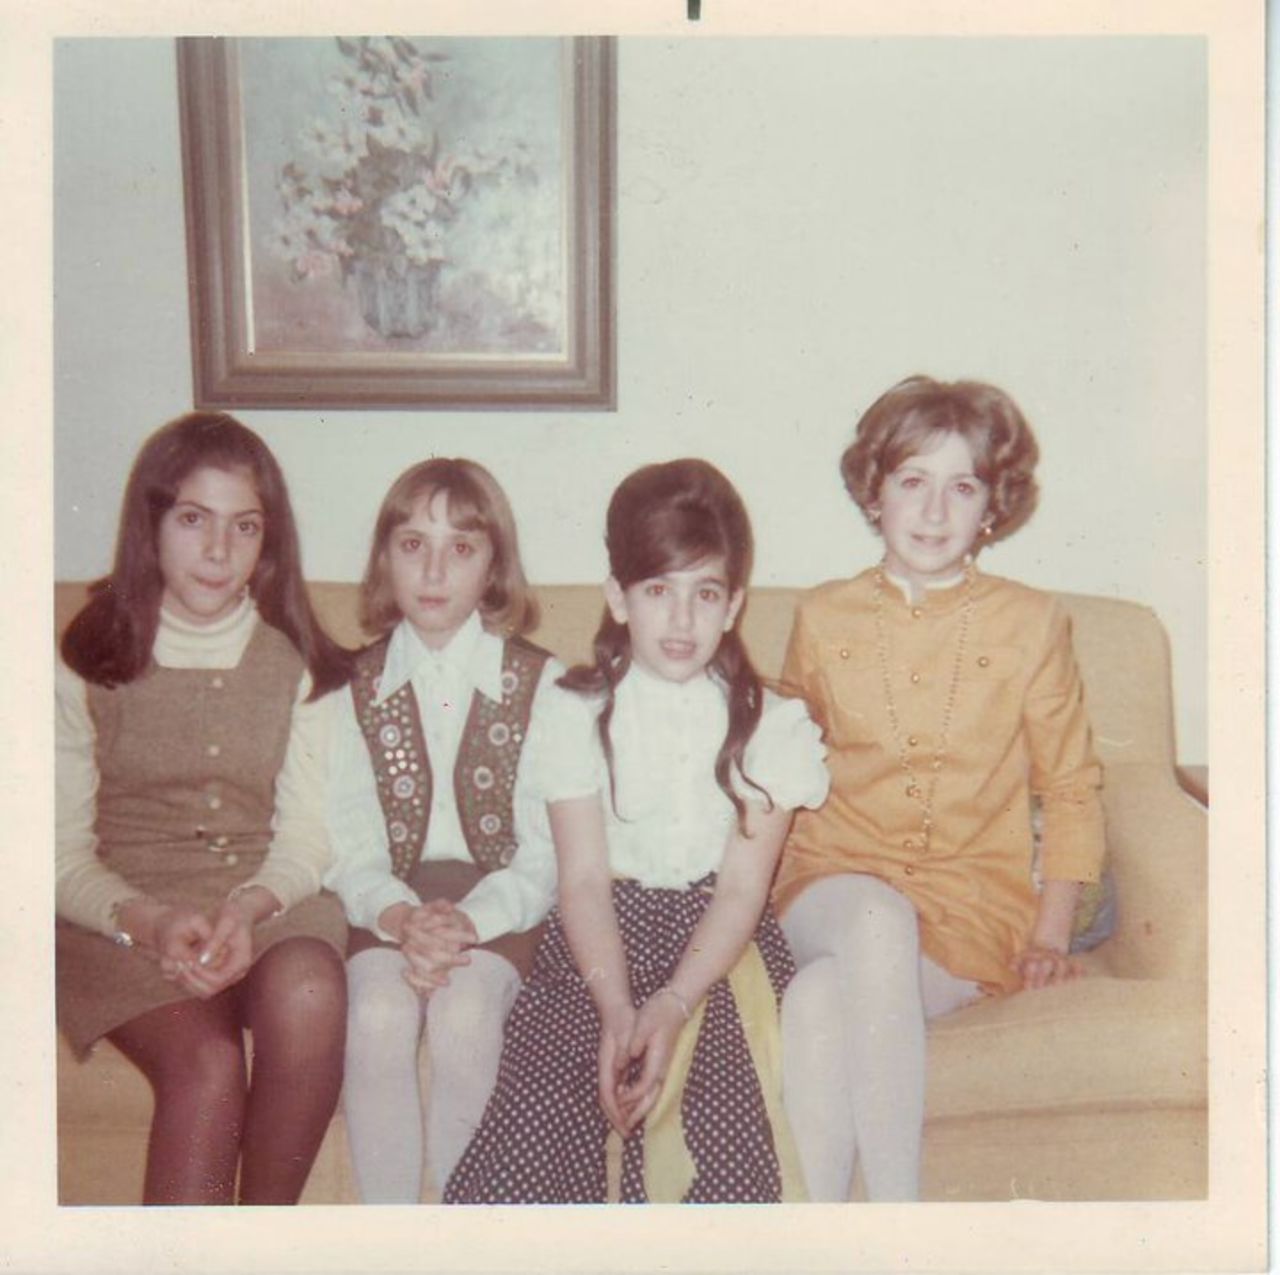 <a href="http://ireport.cnn.com/docs/DOC-951774">Marjorie Zien</a>, second from left, was 10 years old in 1967 when this photo was taken at her Aunt Fran's annual New Year's Eve party. She wore her "really cool mirrored vest" her uncle brought back from Pakistan and a handmade A-line skirt. Her sister, far right, sported a Nehru collar dress accessorized with a medallion necklace.